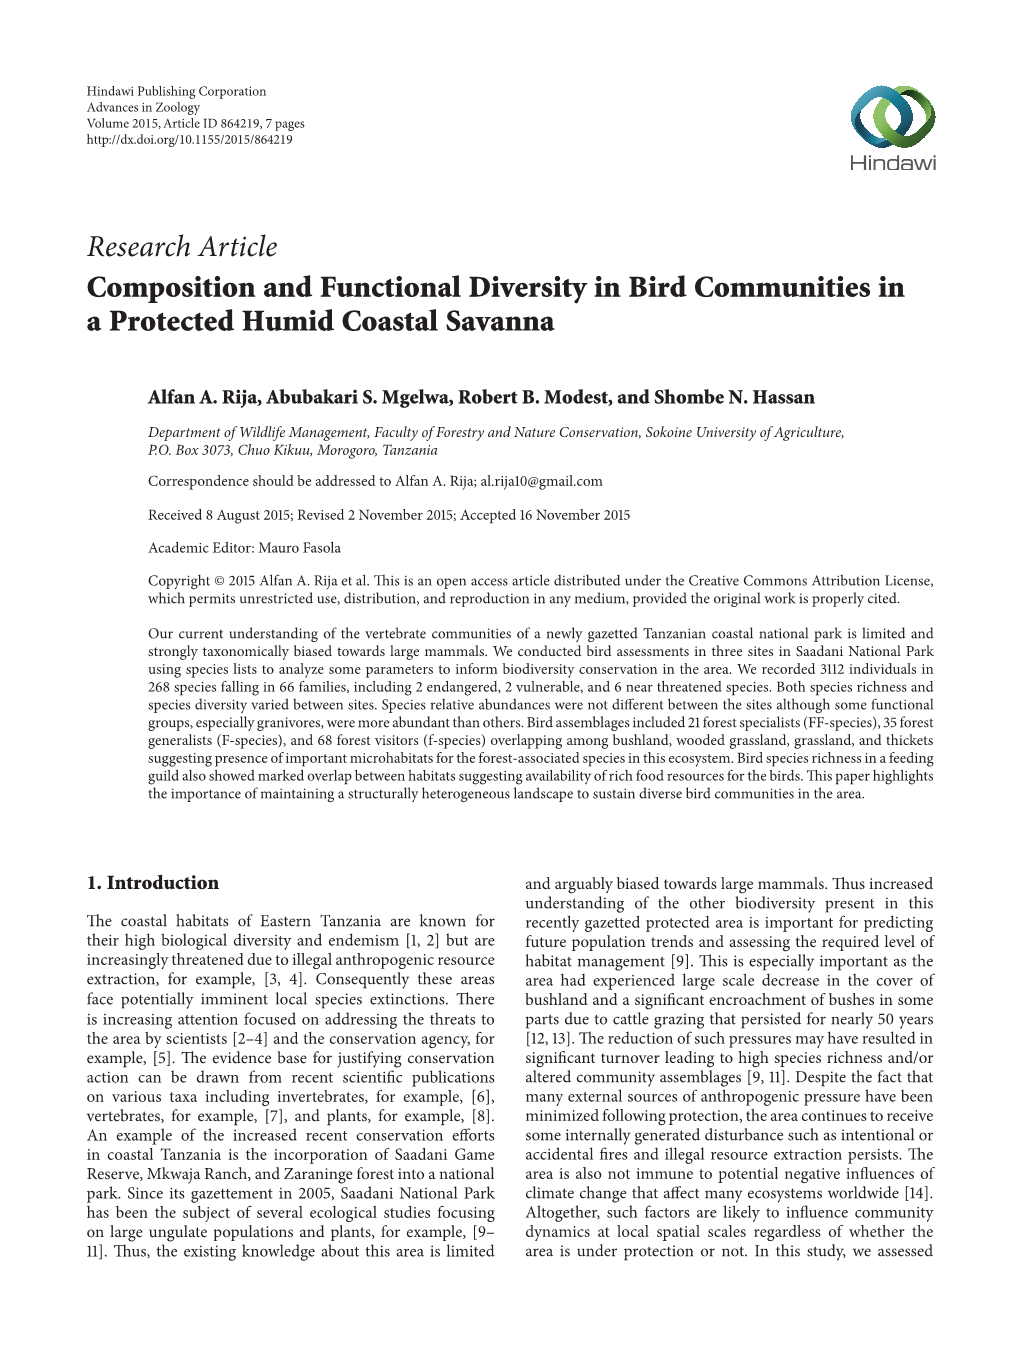 Composition and Functional Diversity in Bird Communities in a Protected Humid Coastal Savanna